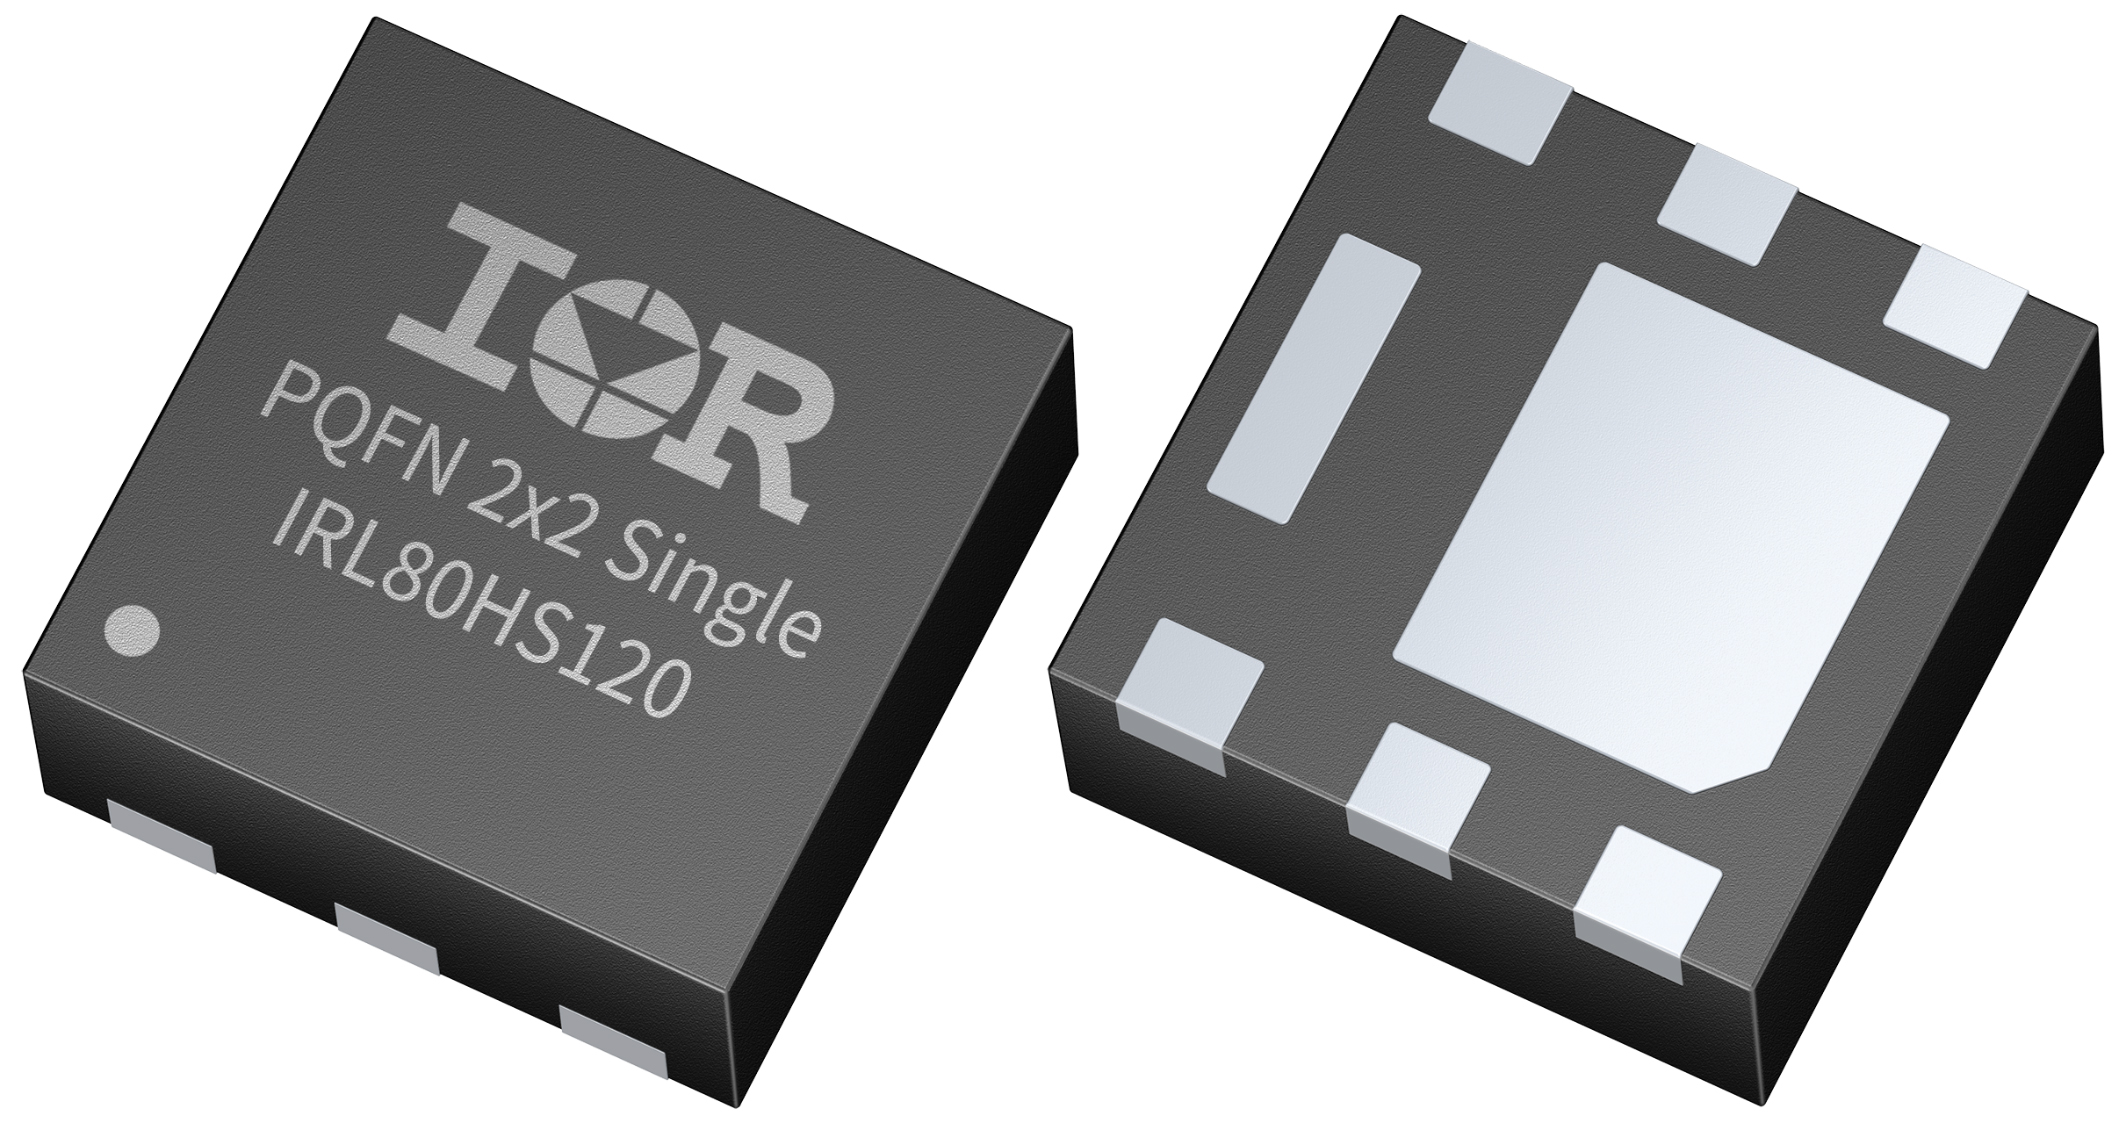 New logic level MOSFETs in PQFN package deliver high power density